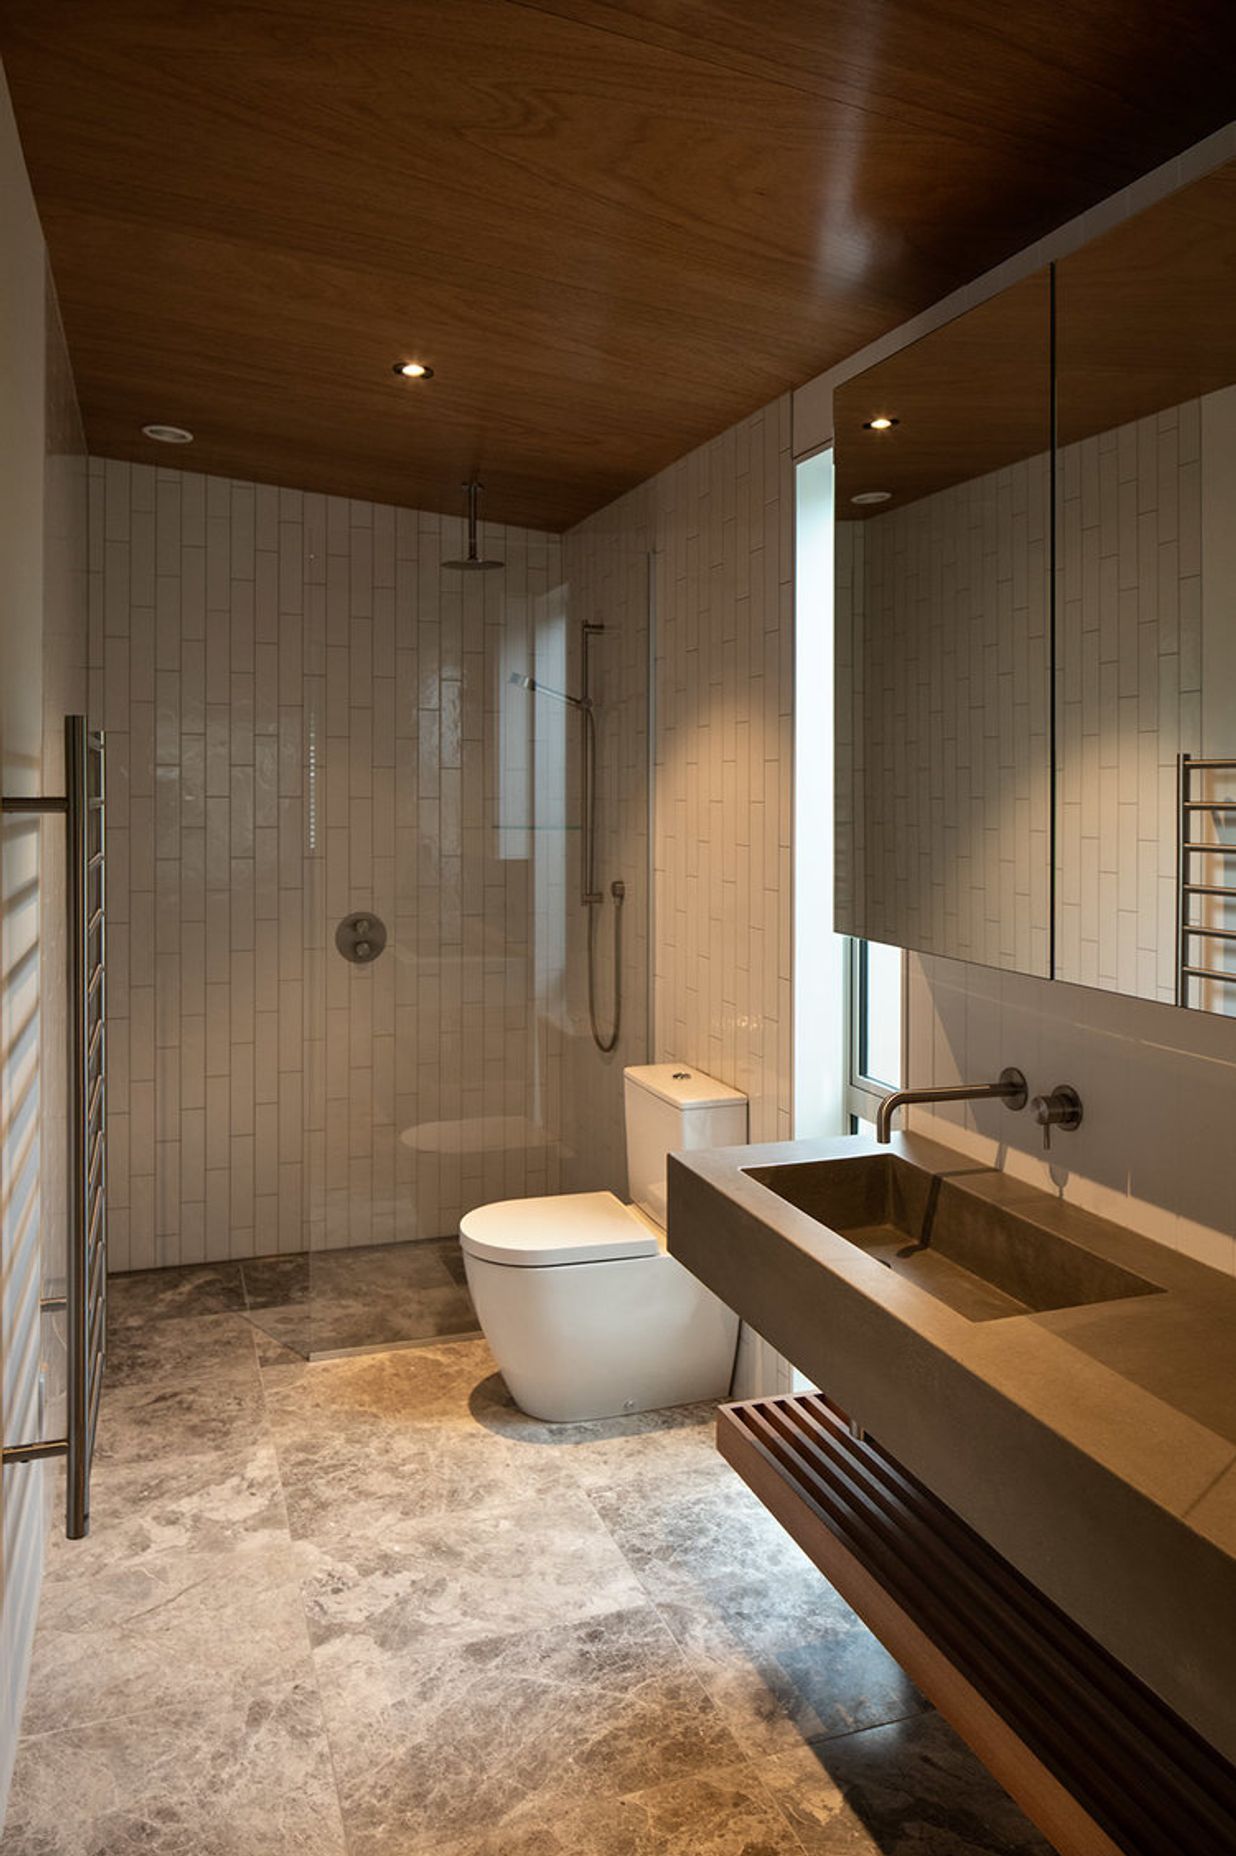 The bathroom in the master bedroom suite.